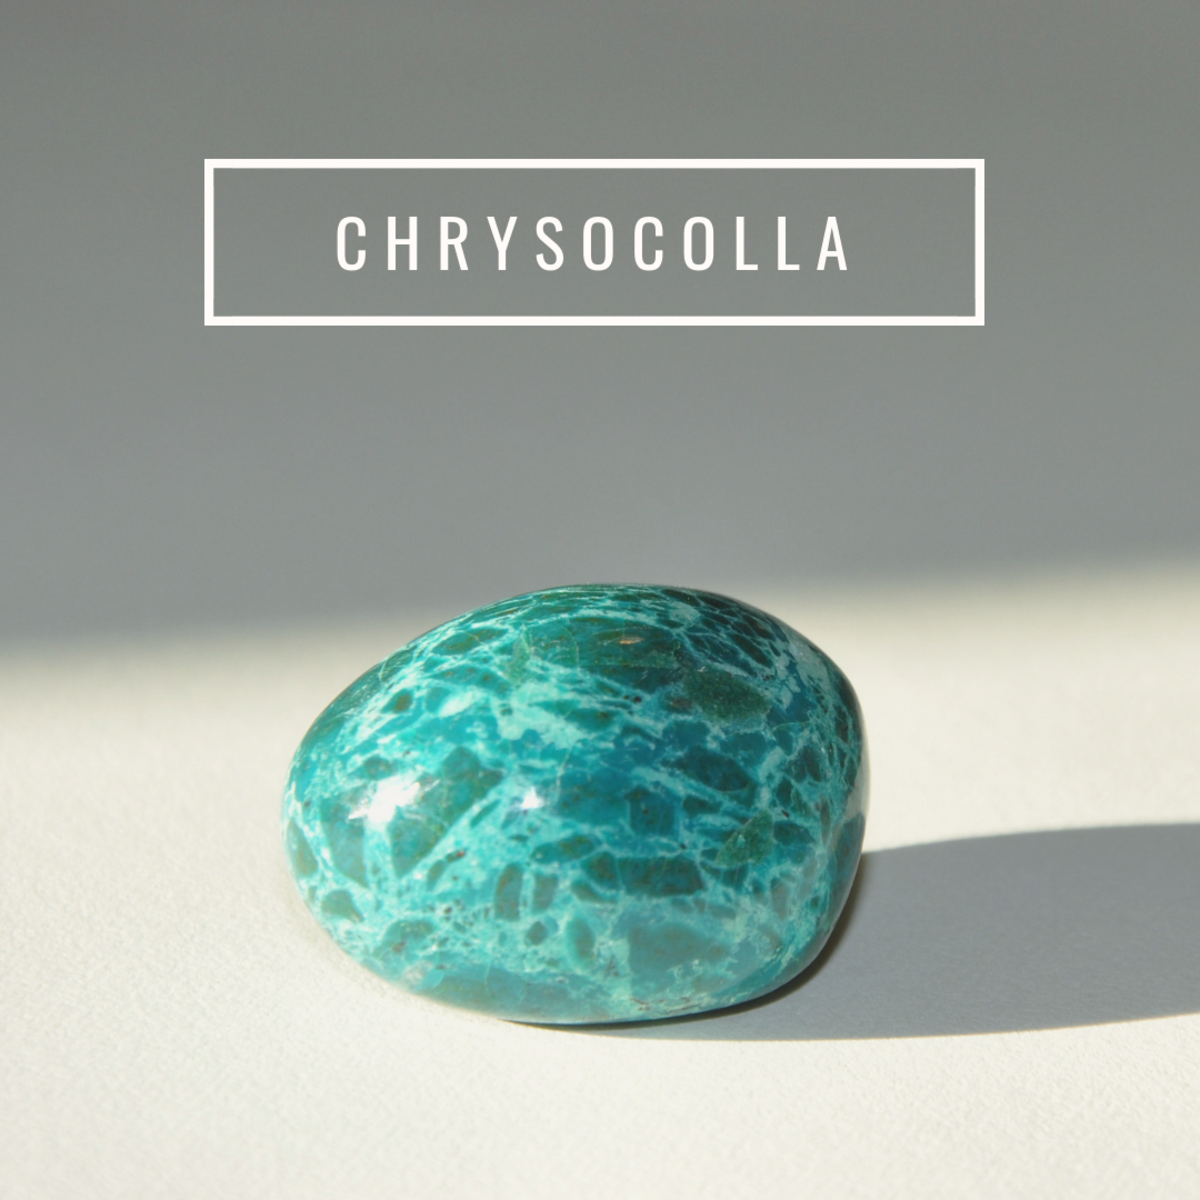 Chrysocolla helps build inner strength and aids communication.